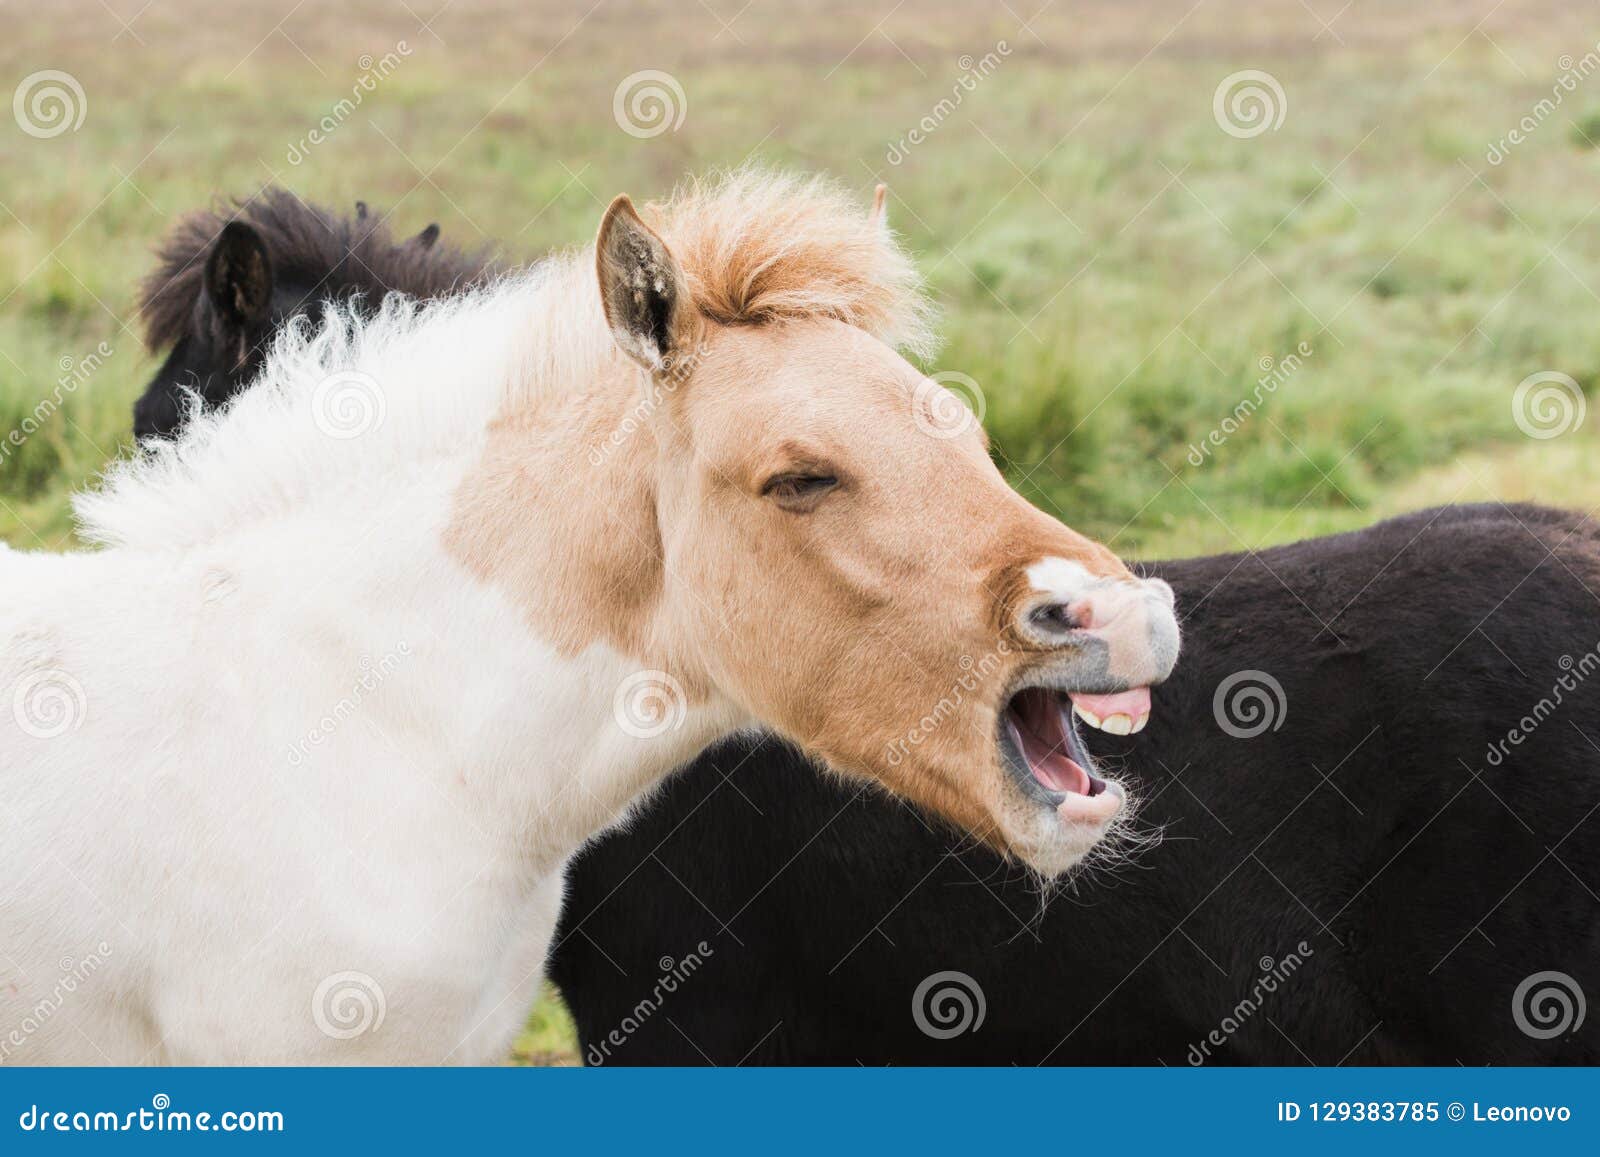 close-up of icelandic horses on the open field with mouth open as if laughing out loud or screaming